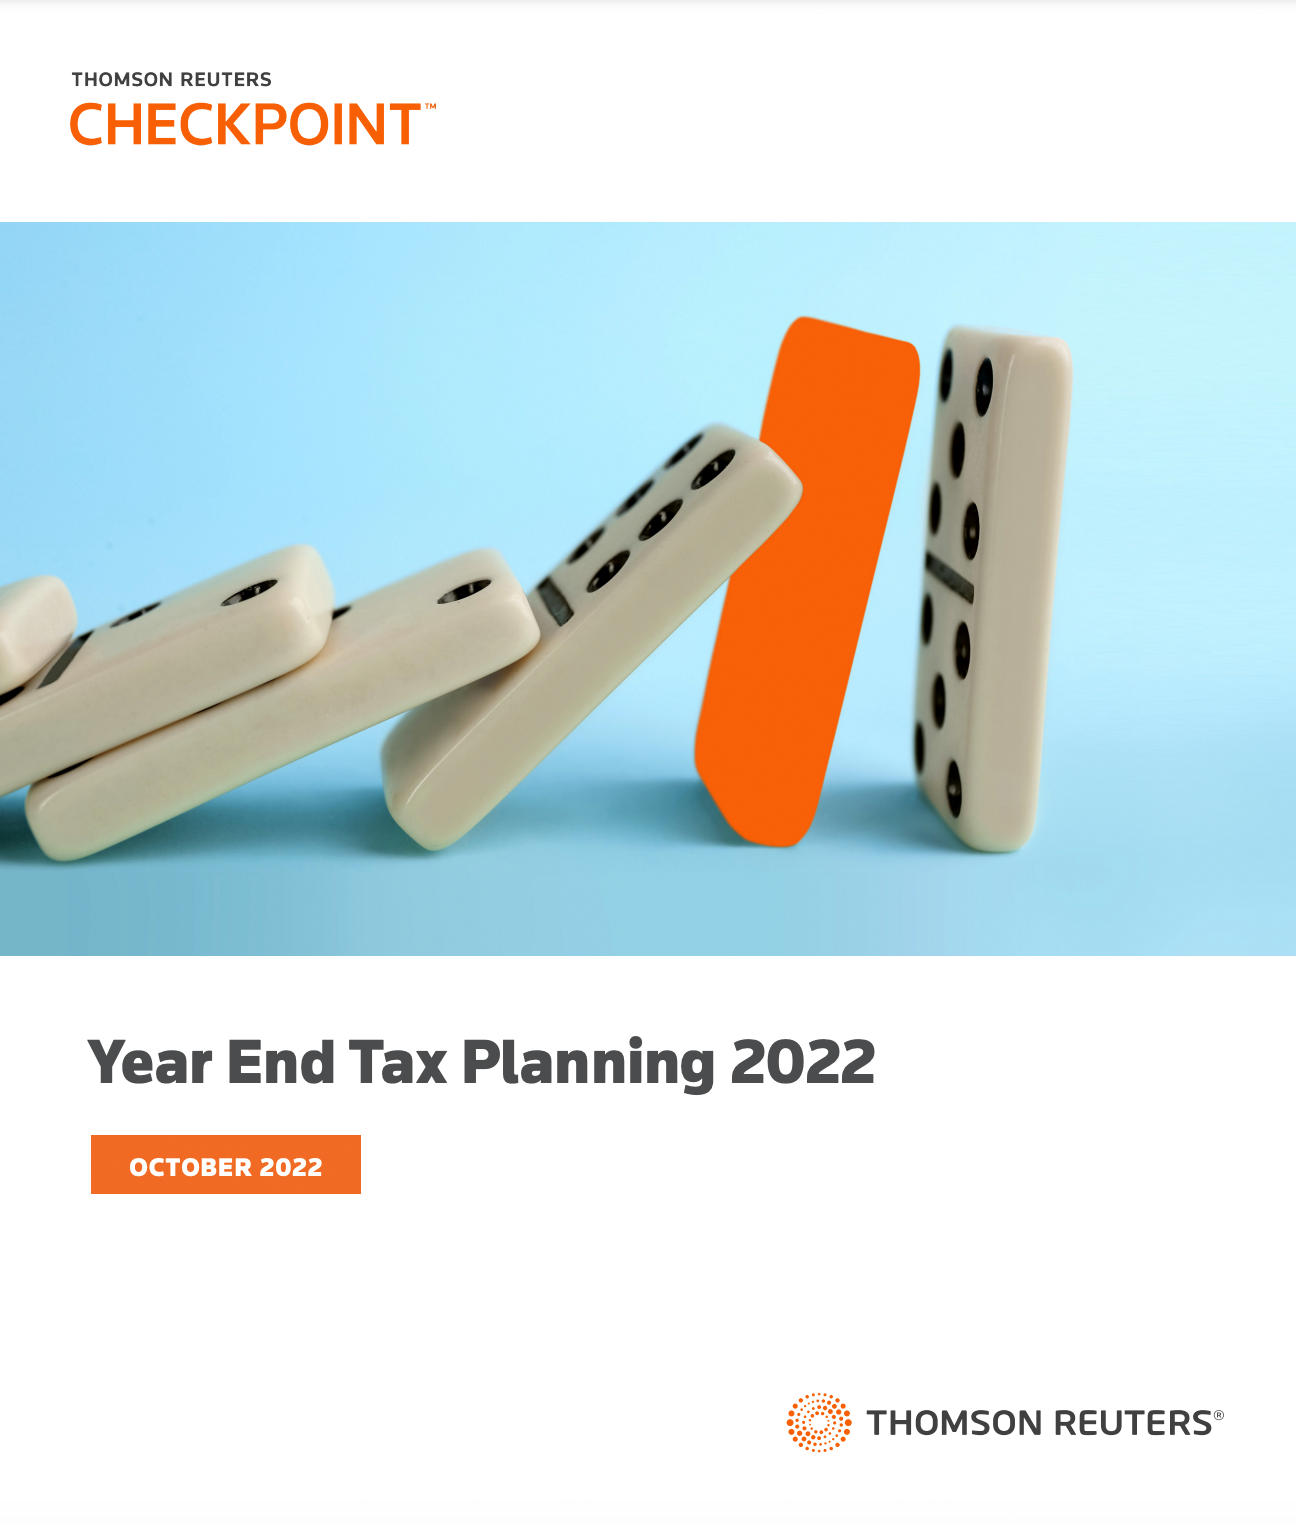 2022 year-end tax planning special report